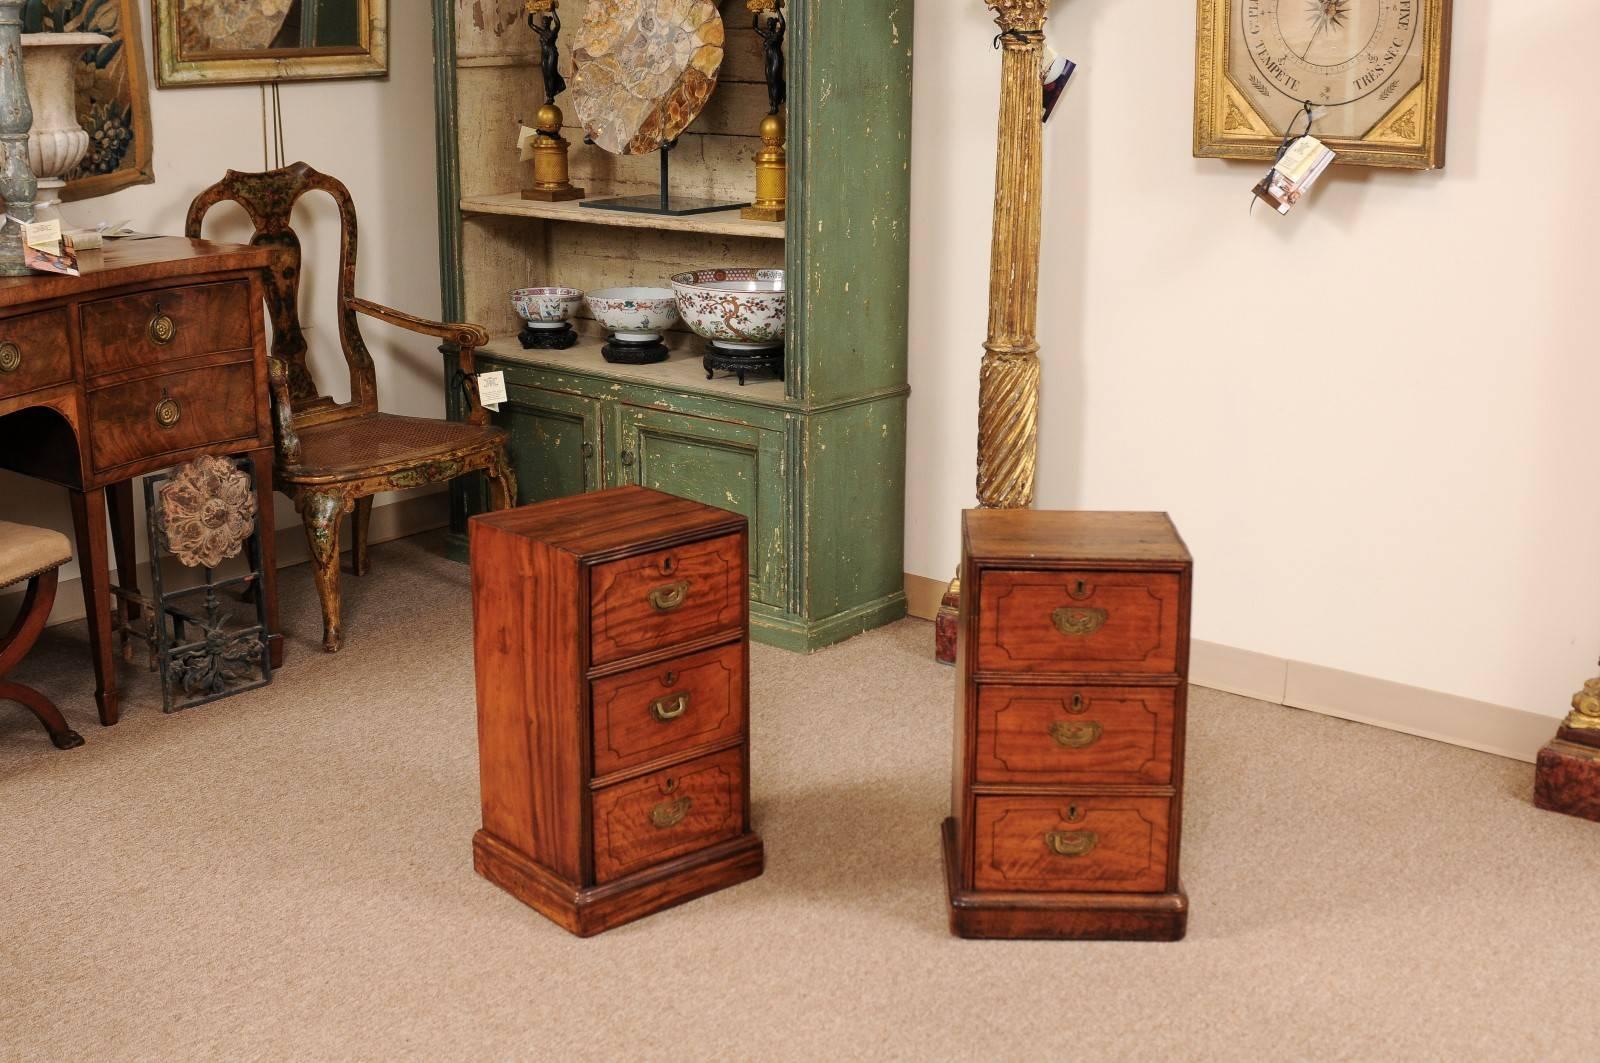 English Pair of Campaign Style Bedside Tables in Mahogany with Three Drawers